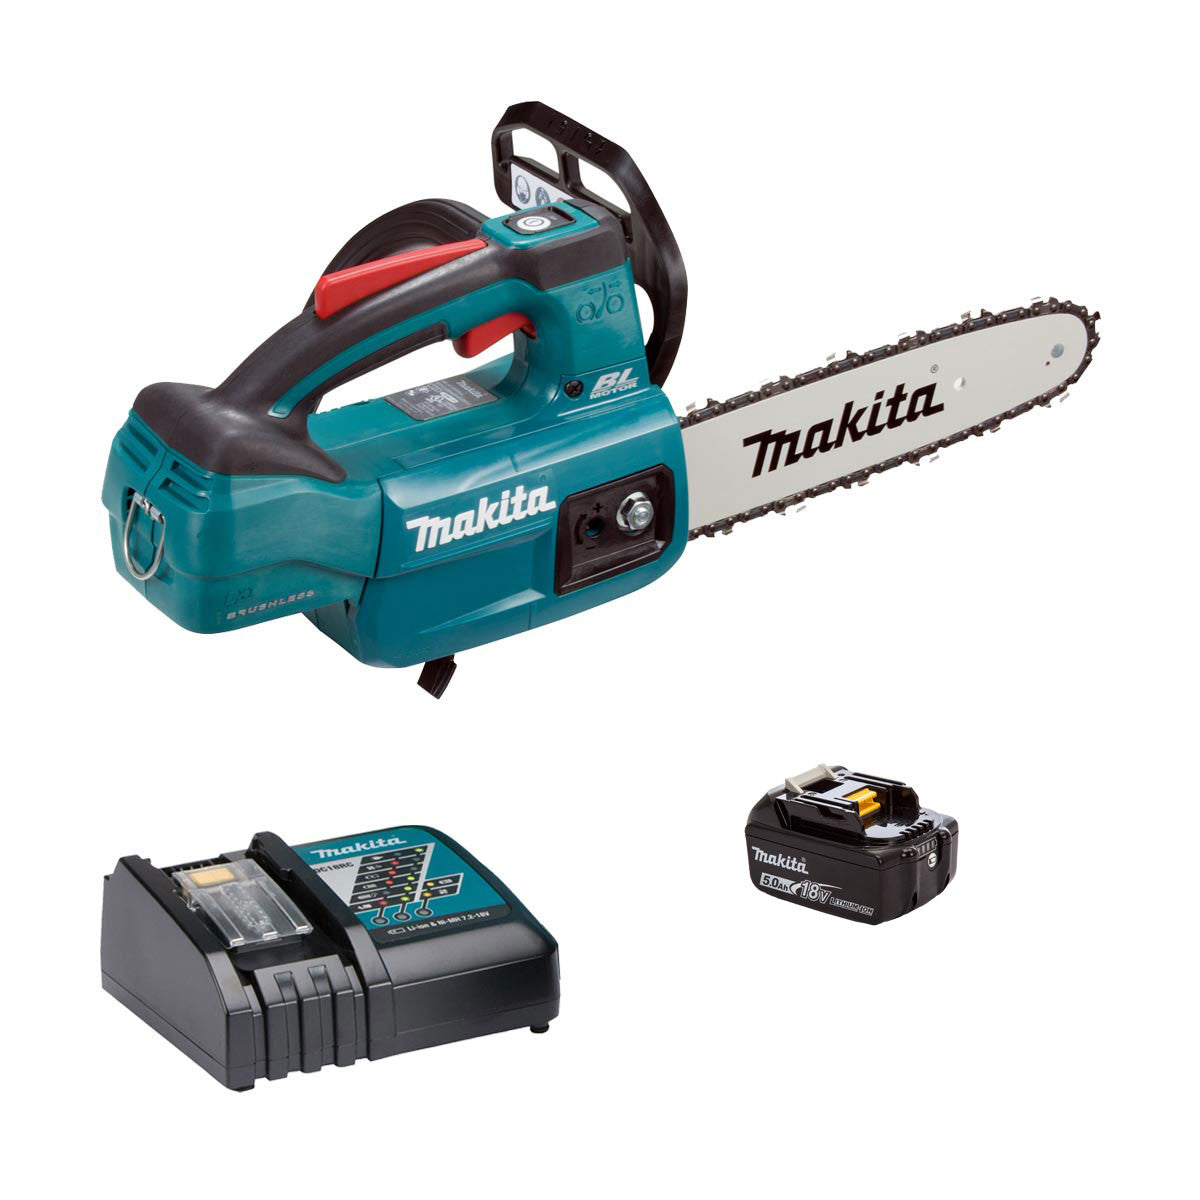 Makita DUC254 Single 18V Brushless Top-Handle Chainsaw 250mm - 1 x 5.0Ah + Charger